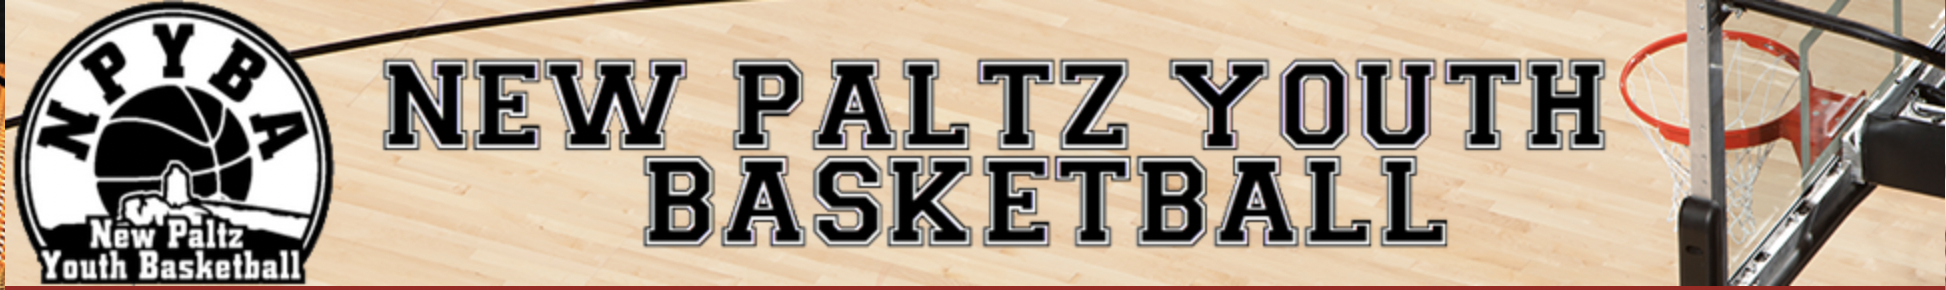 New Paltz Youth Basketball 